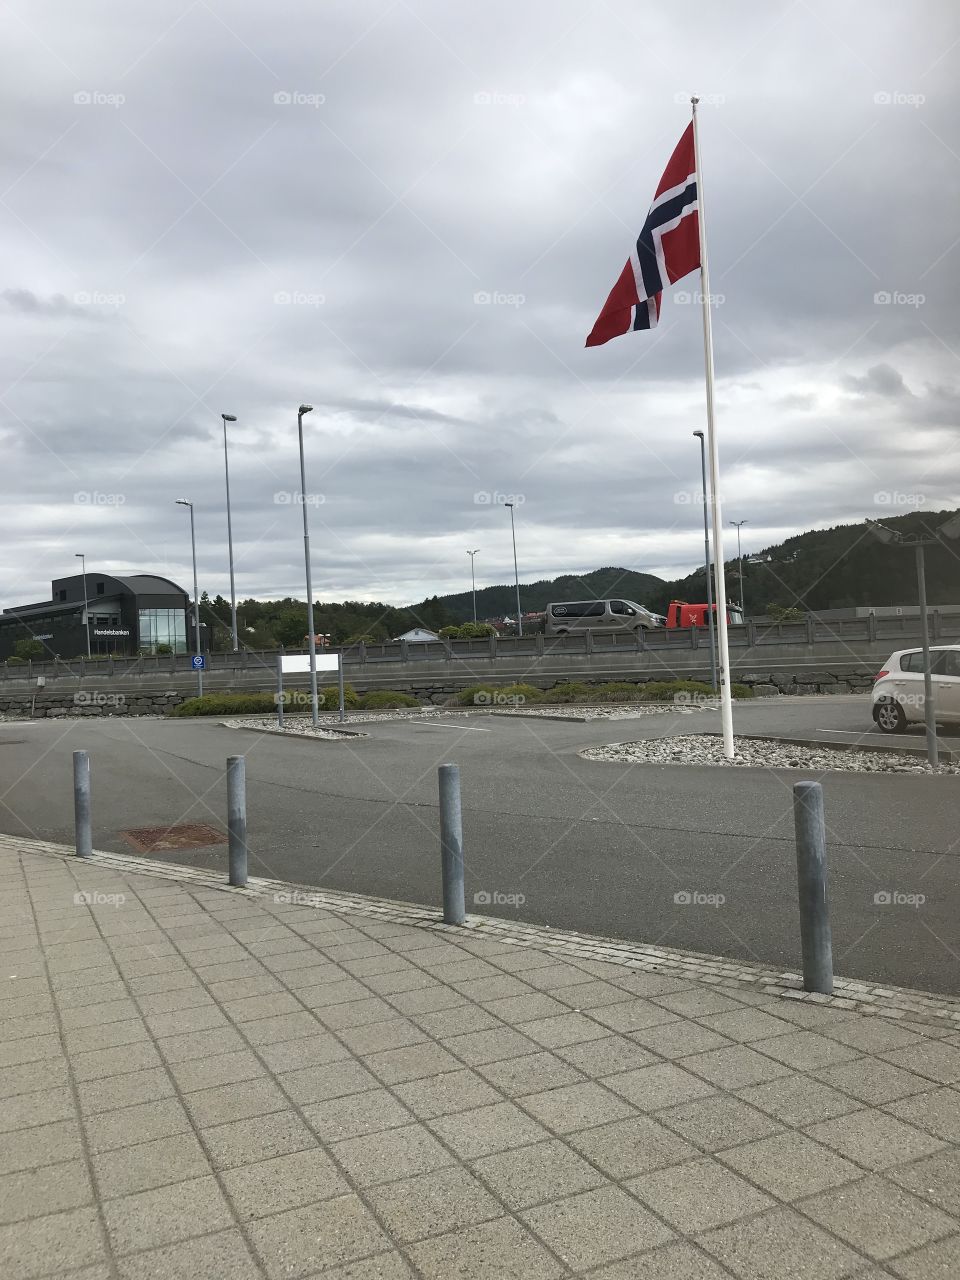 Norwegian flag in a flagpole. The picture is taken outside the ikea store in “Åsane” in Norway.🇳🇴